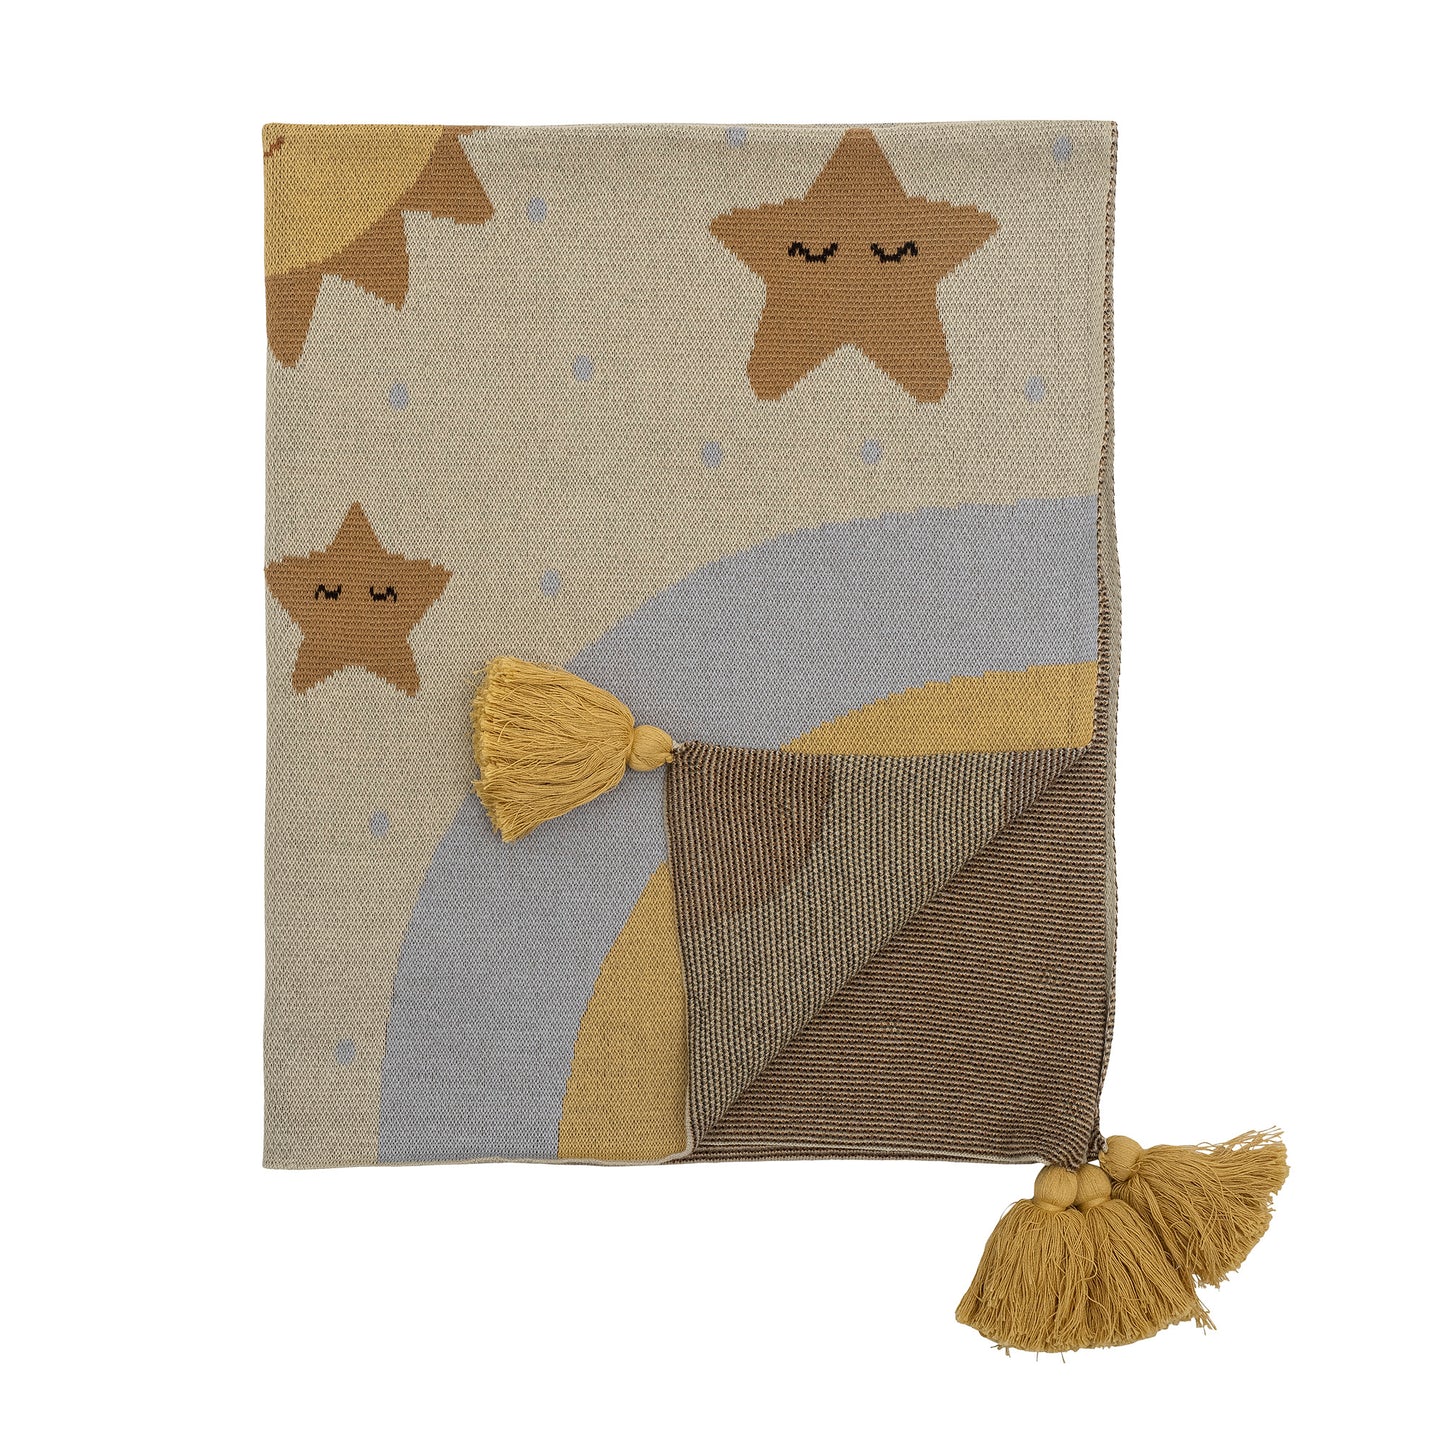 Generosa Home- The Vigge Throw by Bloomingville MINI is a knitted blanket made of Oeko-Tex certified cotton. The blanket is super cute with the moon, sun and other sky-themed figures and is the perfect size for younger children. With tassels in each corner, as a nice detail.